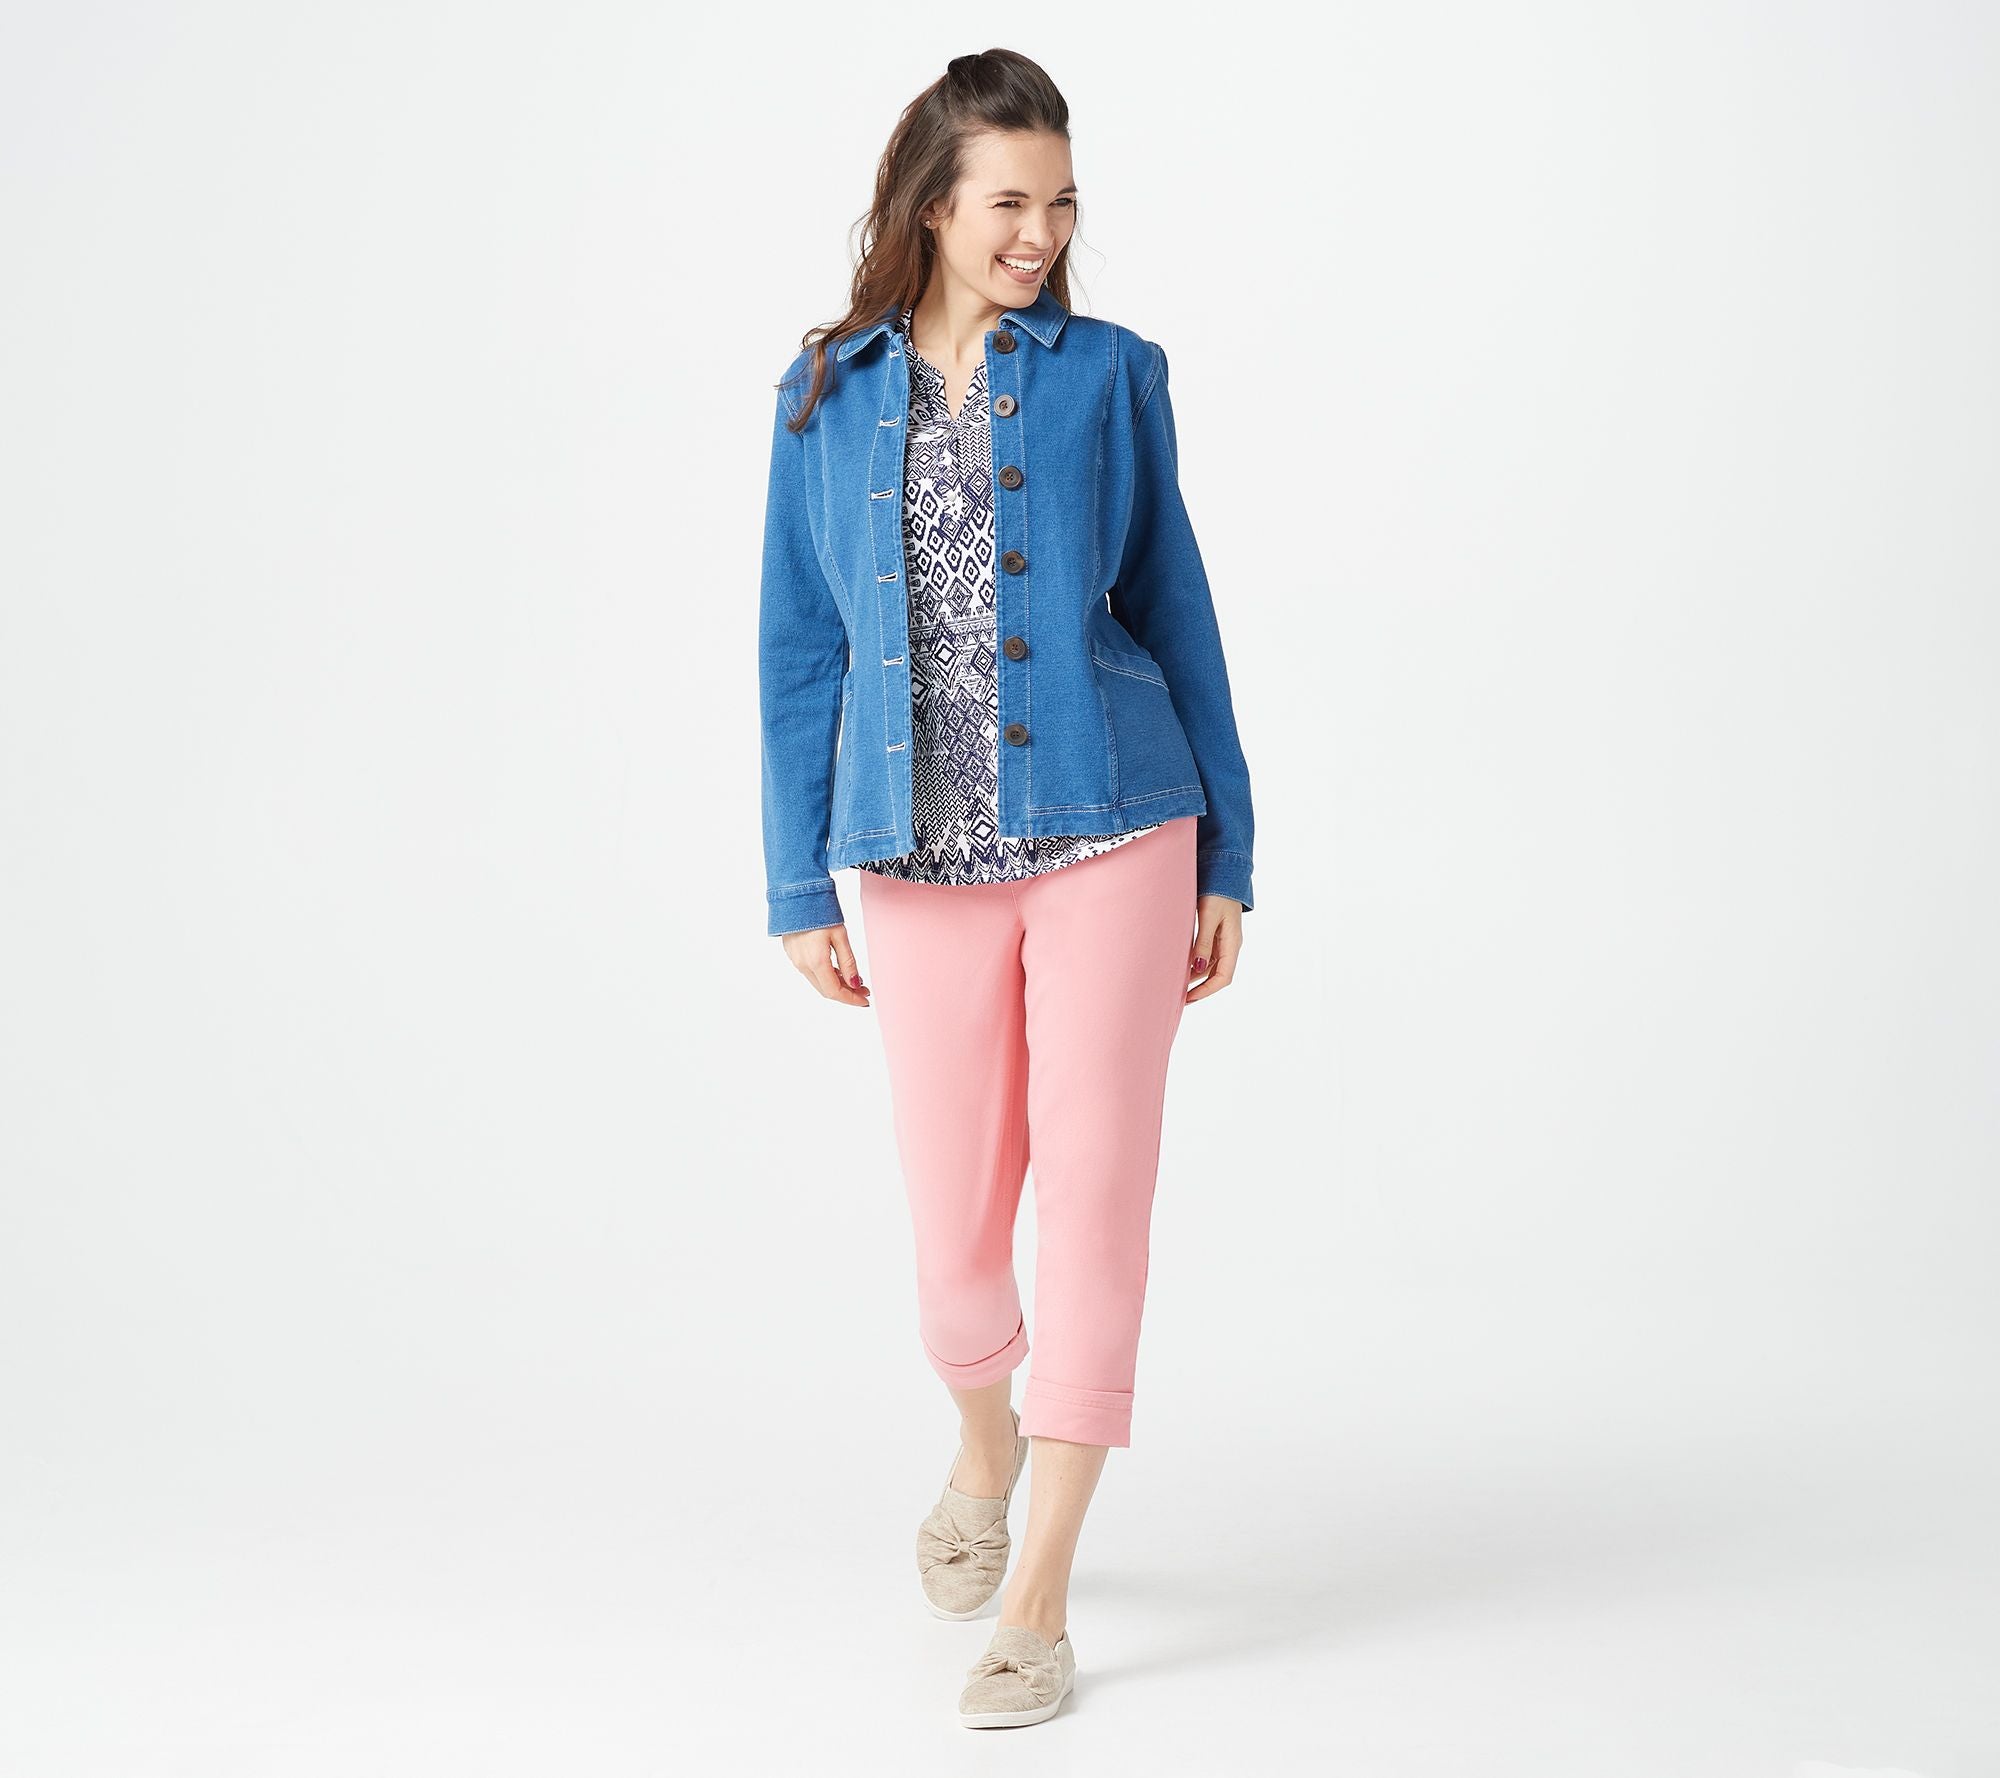 Denim & Co. Comfy Knit Button Jacket with Contrast Stitching